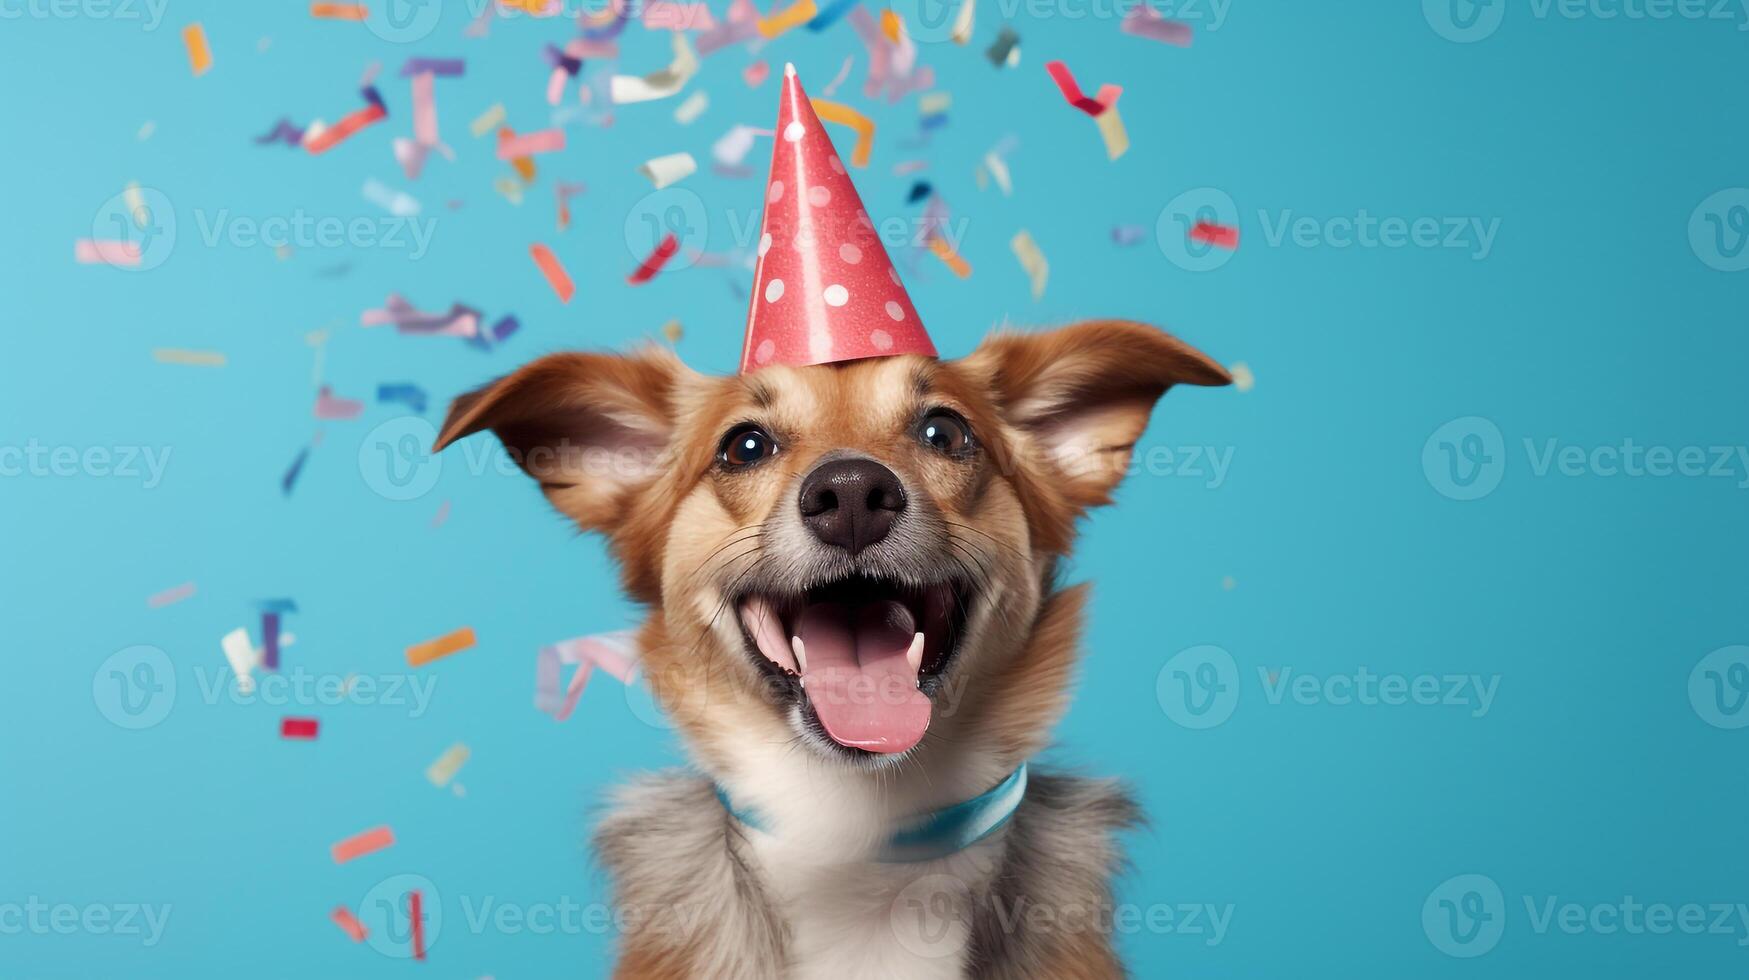 happy and funny cute dog wearing party hat celebrating birthday and Colored confetti flowing up on blue studio, photo